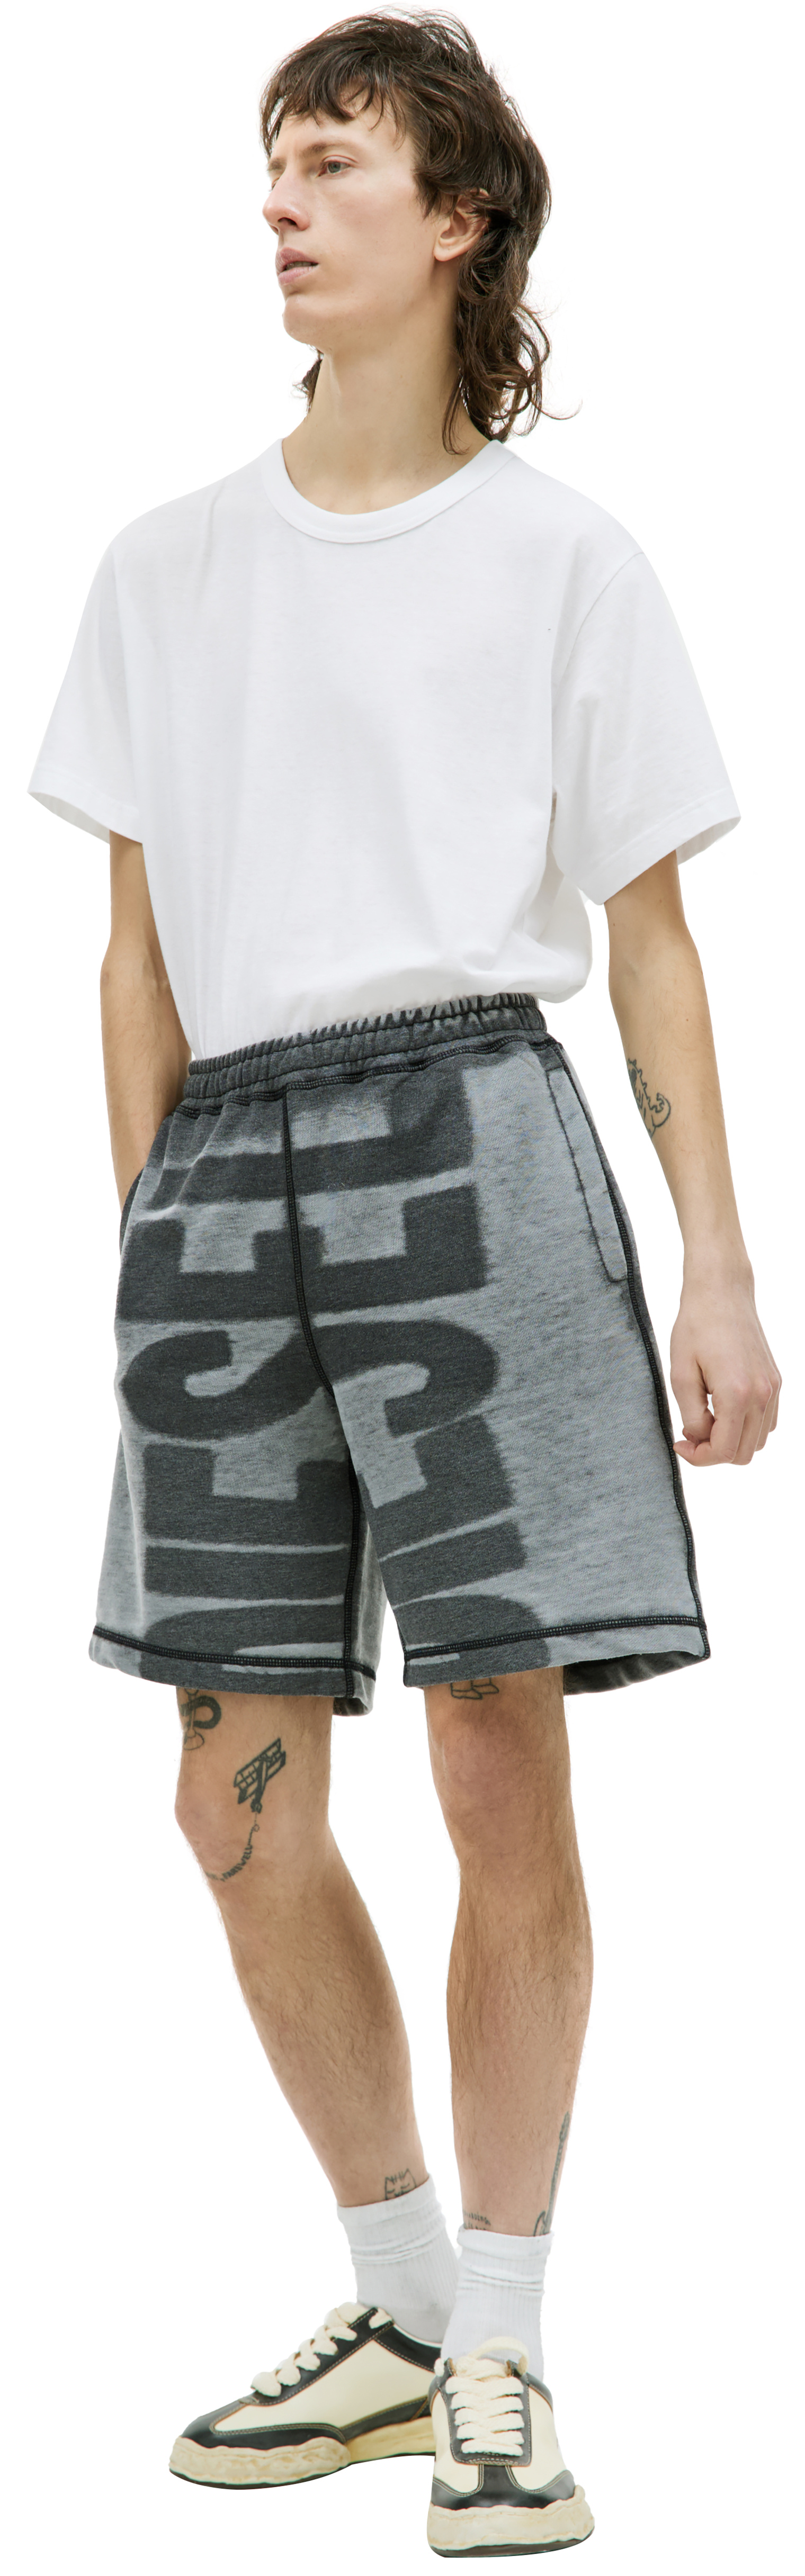 Diesel P-Rown sweat shorts with logo